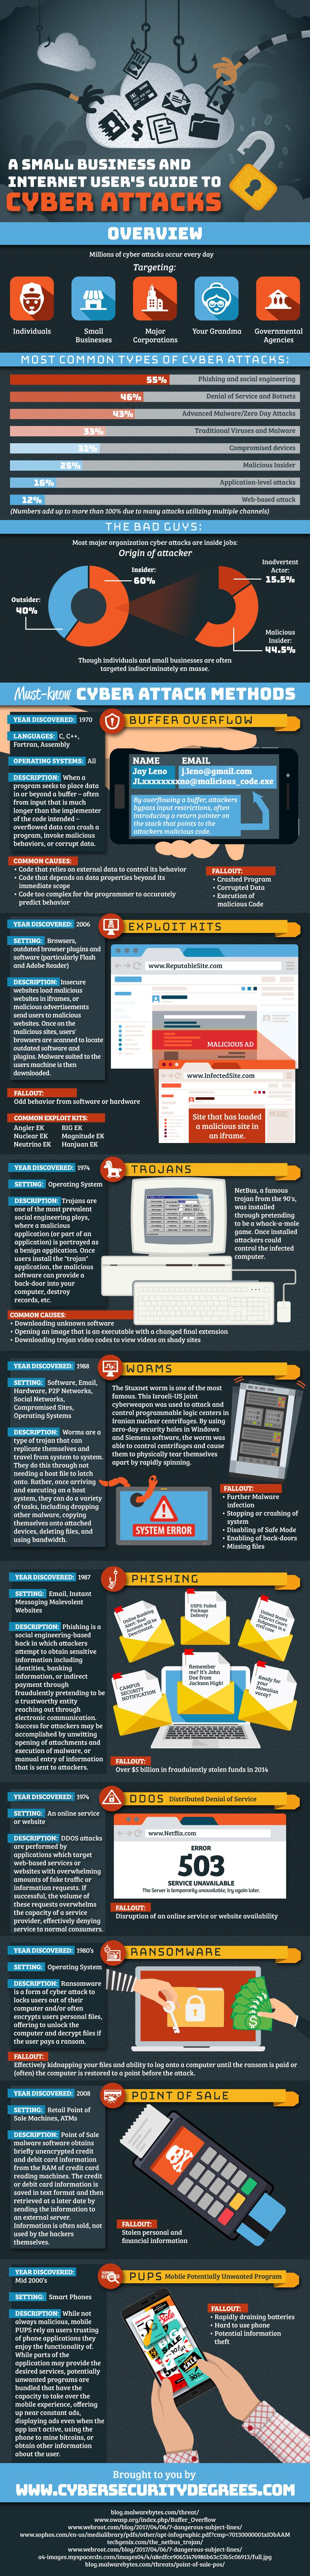 A Small Business and Internet User's Guide to Cyber Attacks [Infographic]